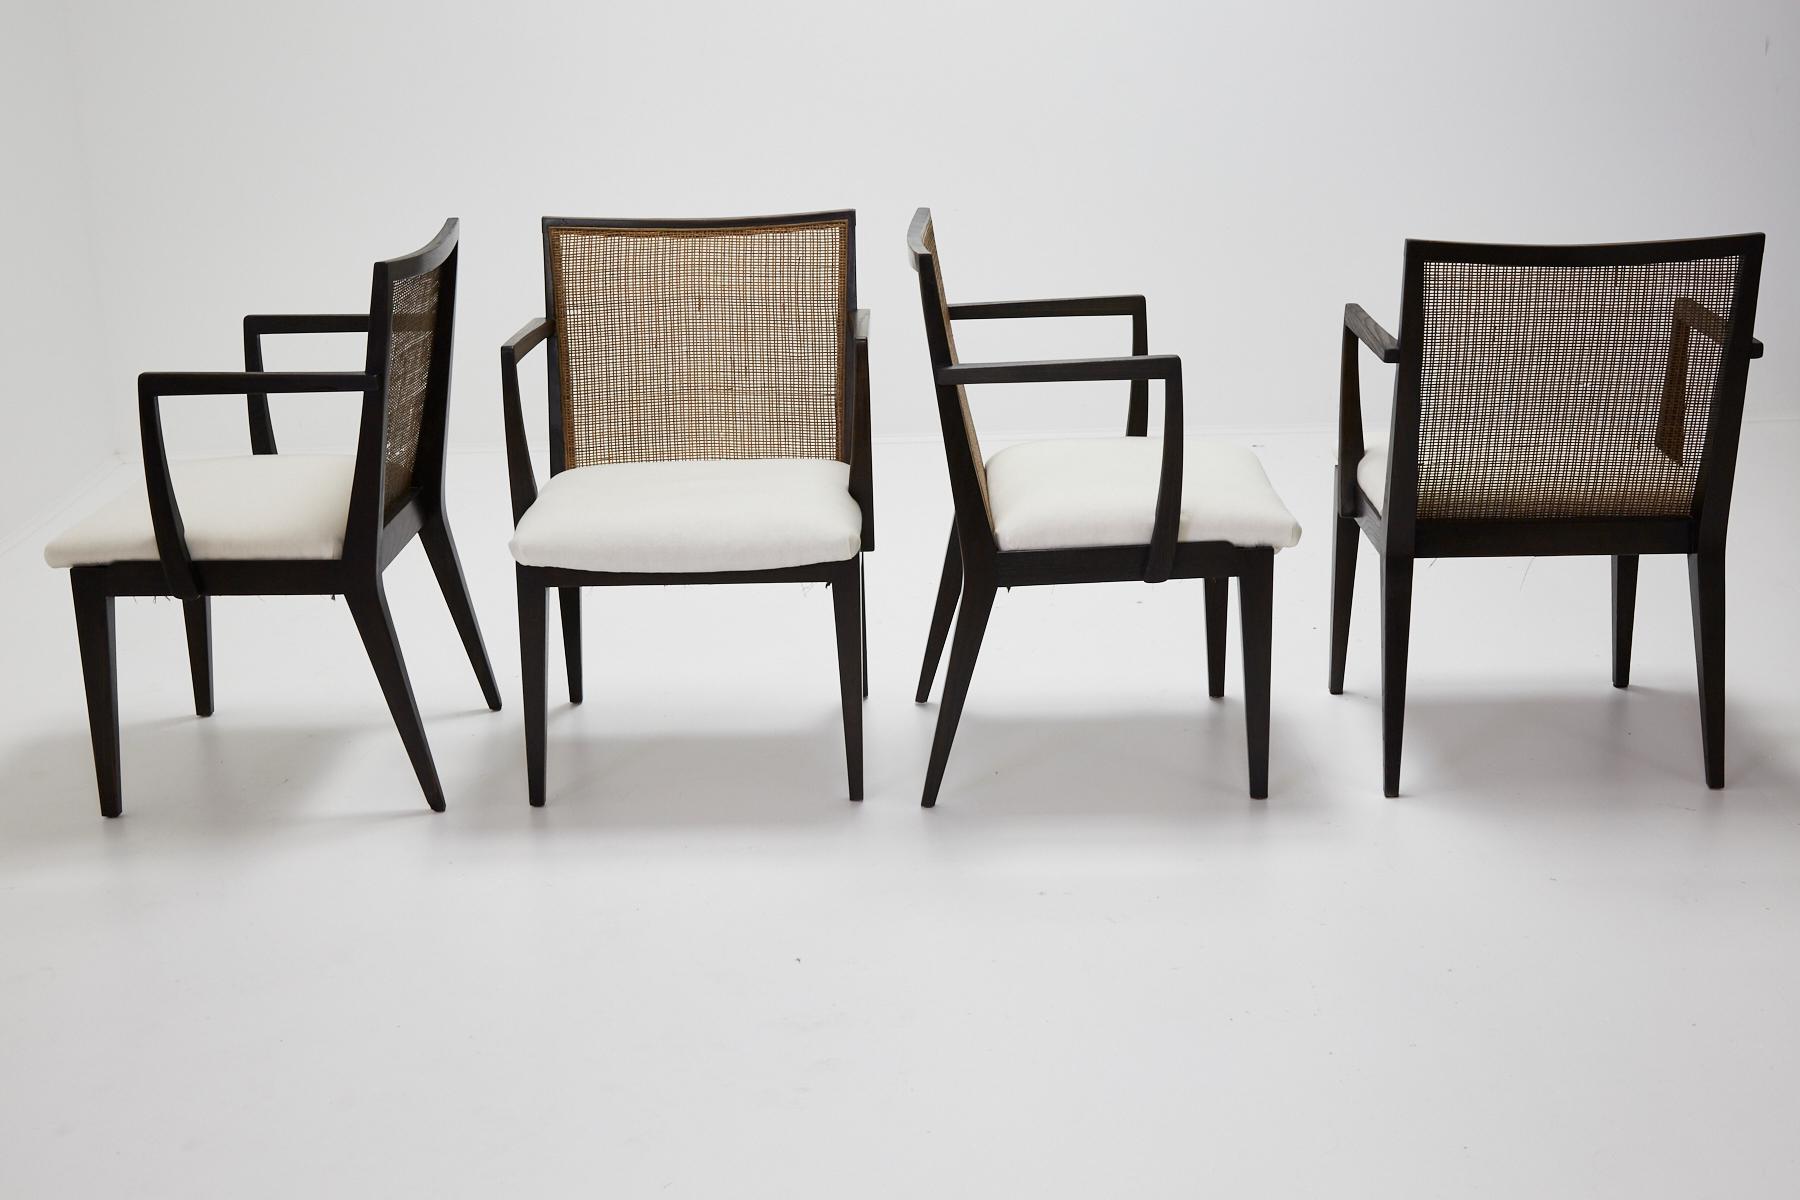 Set of four dining armchairs, model no. 5954 designed by Edward Wormley for Dunbar. Stained oak frames retain original caned backs. Seats have been reupholstered in muslin and ready for your specific fabric choice. Chairs retain brass Dunbar label